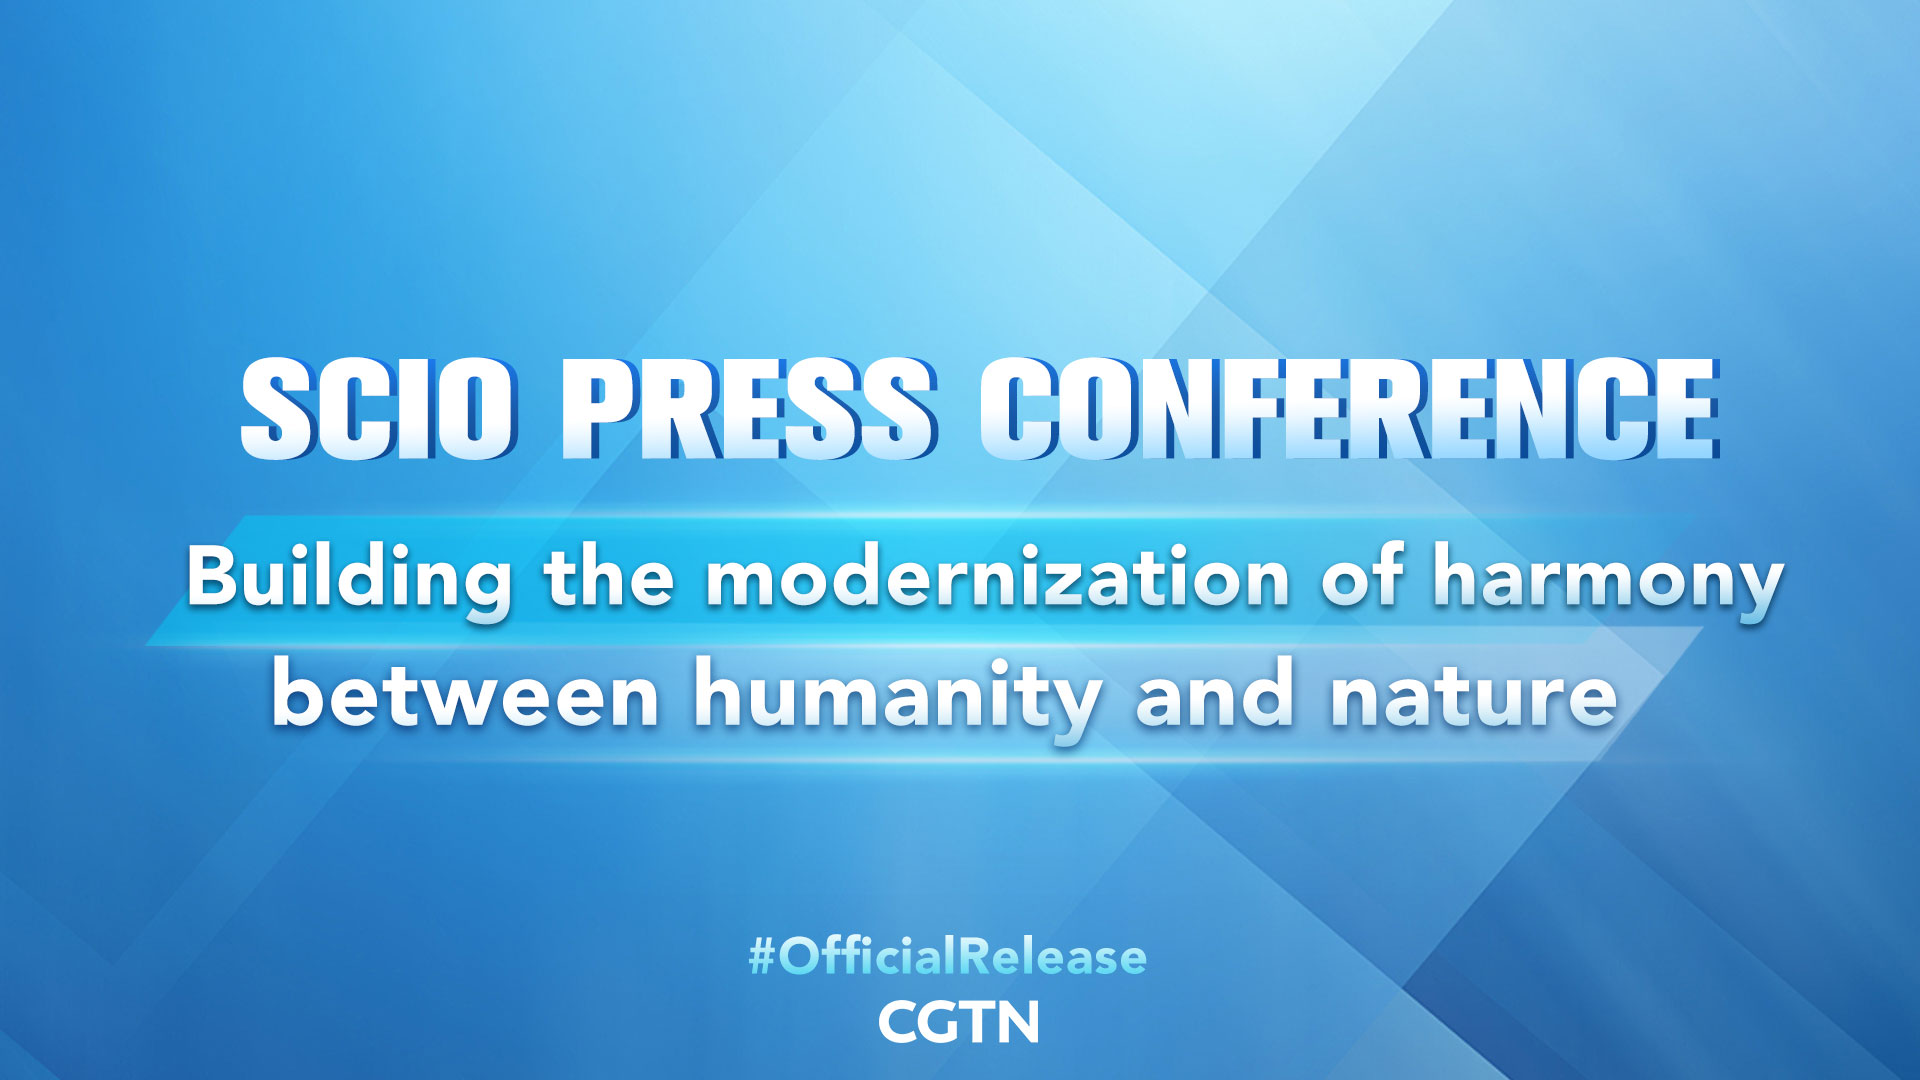 Live: SCIO briefs media on building the modernization of harmony between humanity and nature